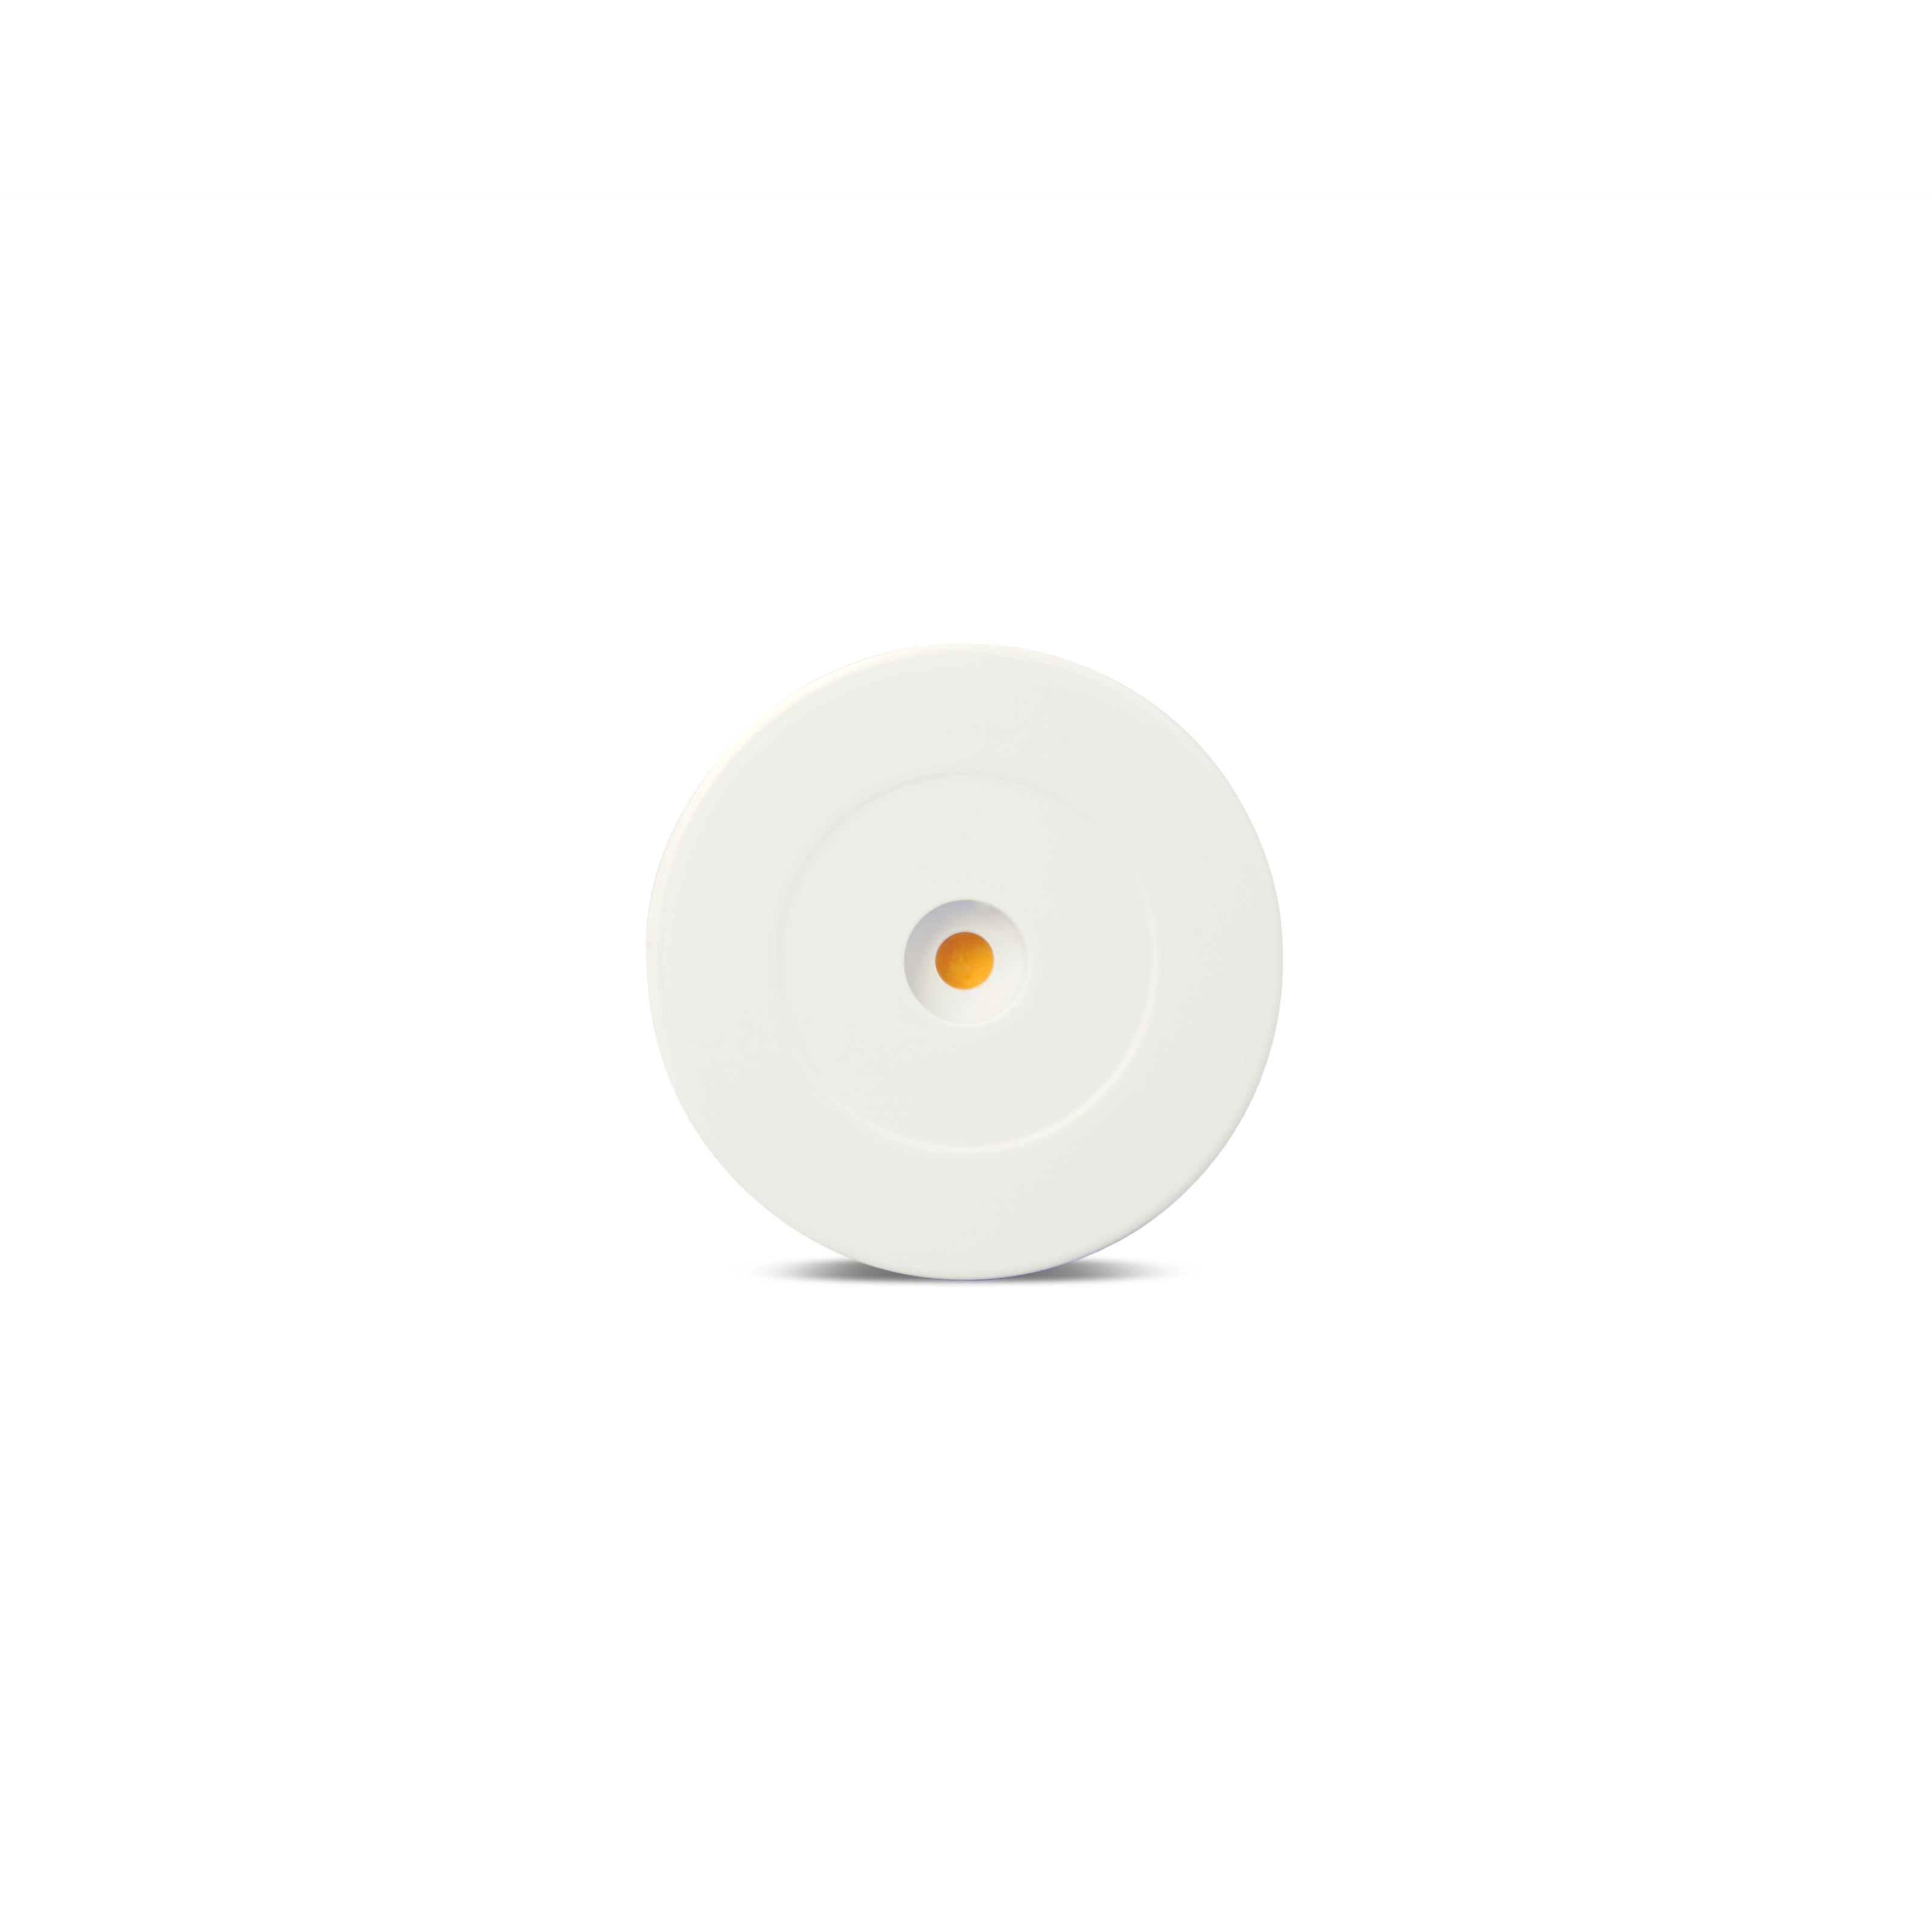 NFC Heavy ABS - On-Metal - 52 mm - NTAG213 - 180 Byte - white